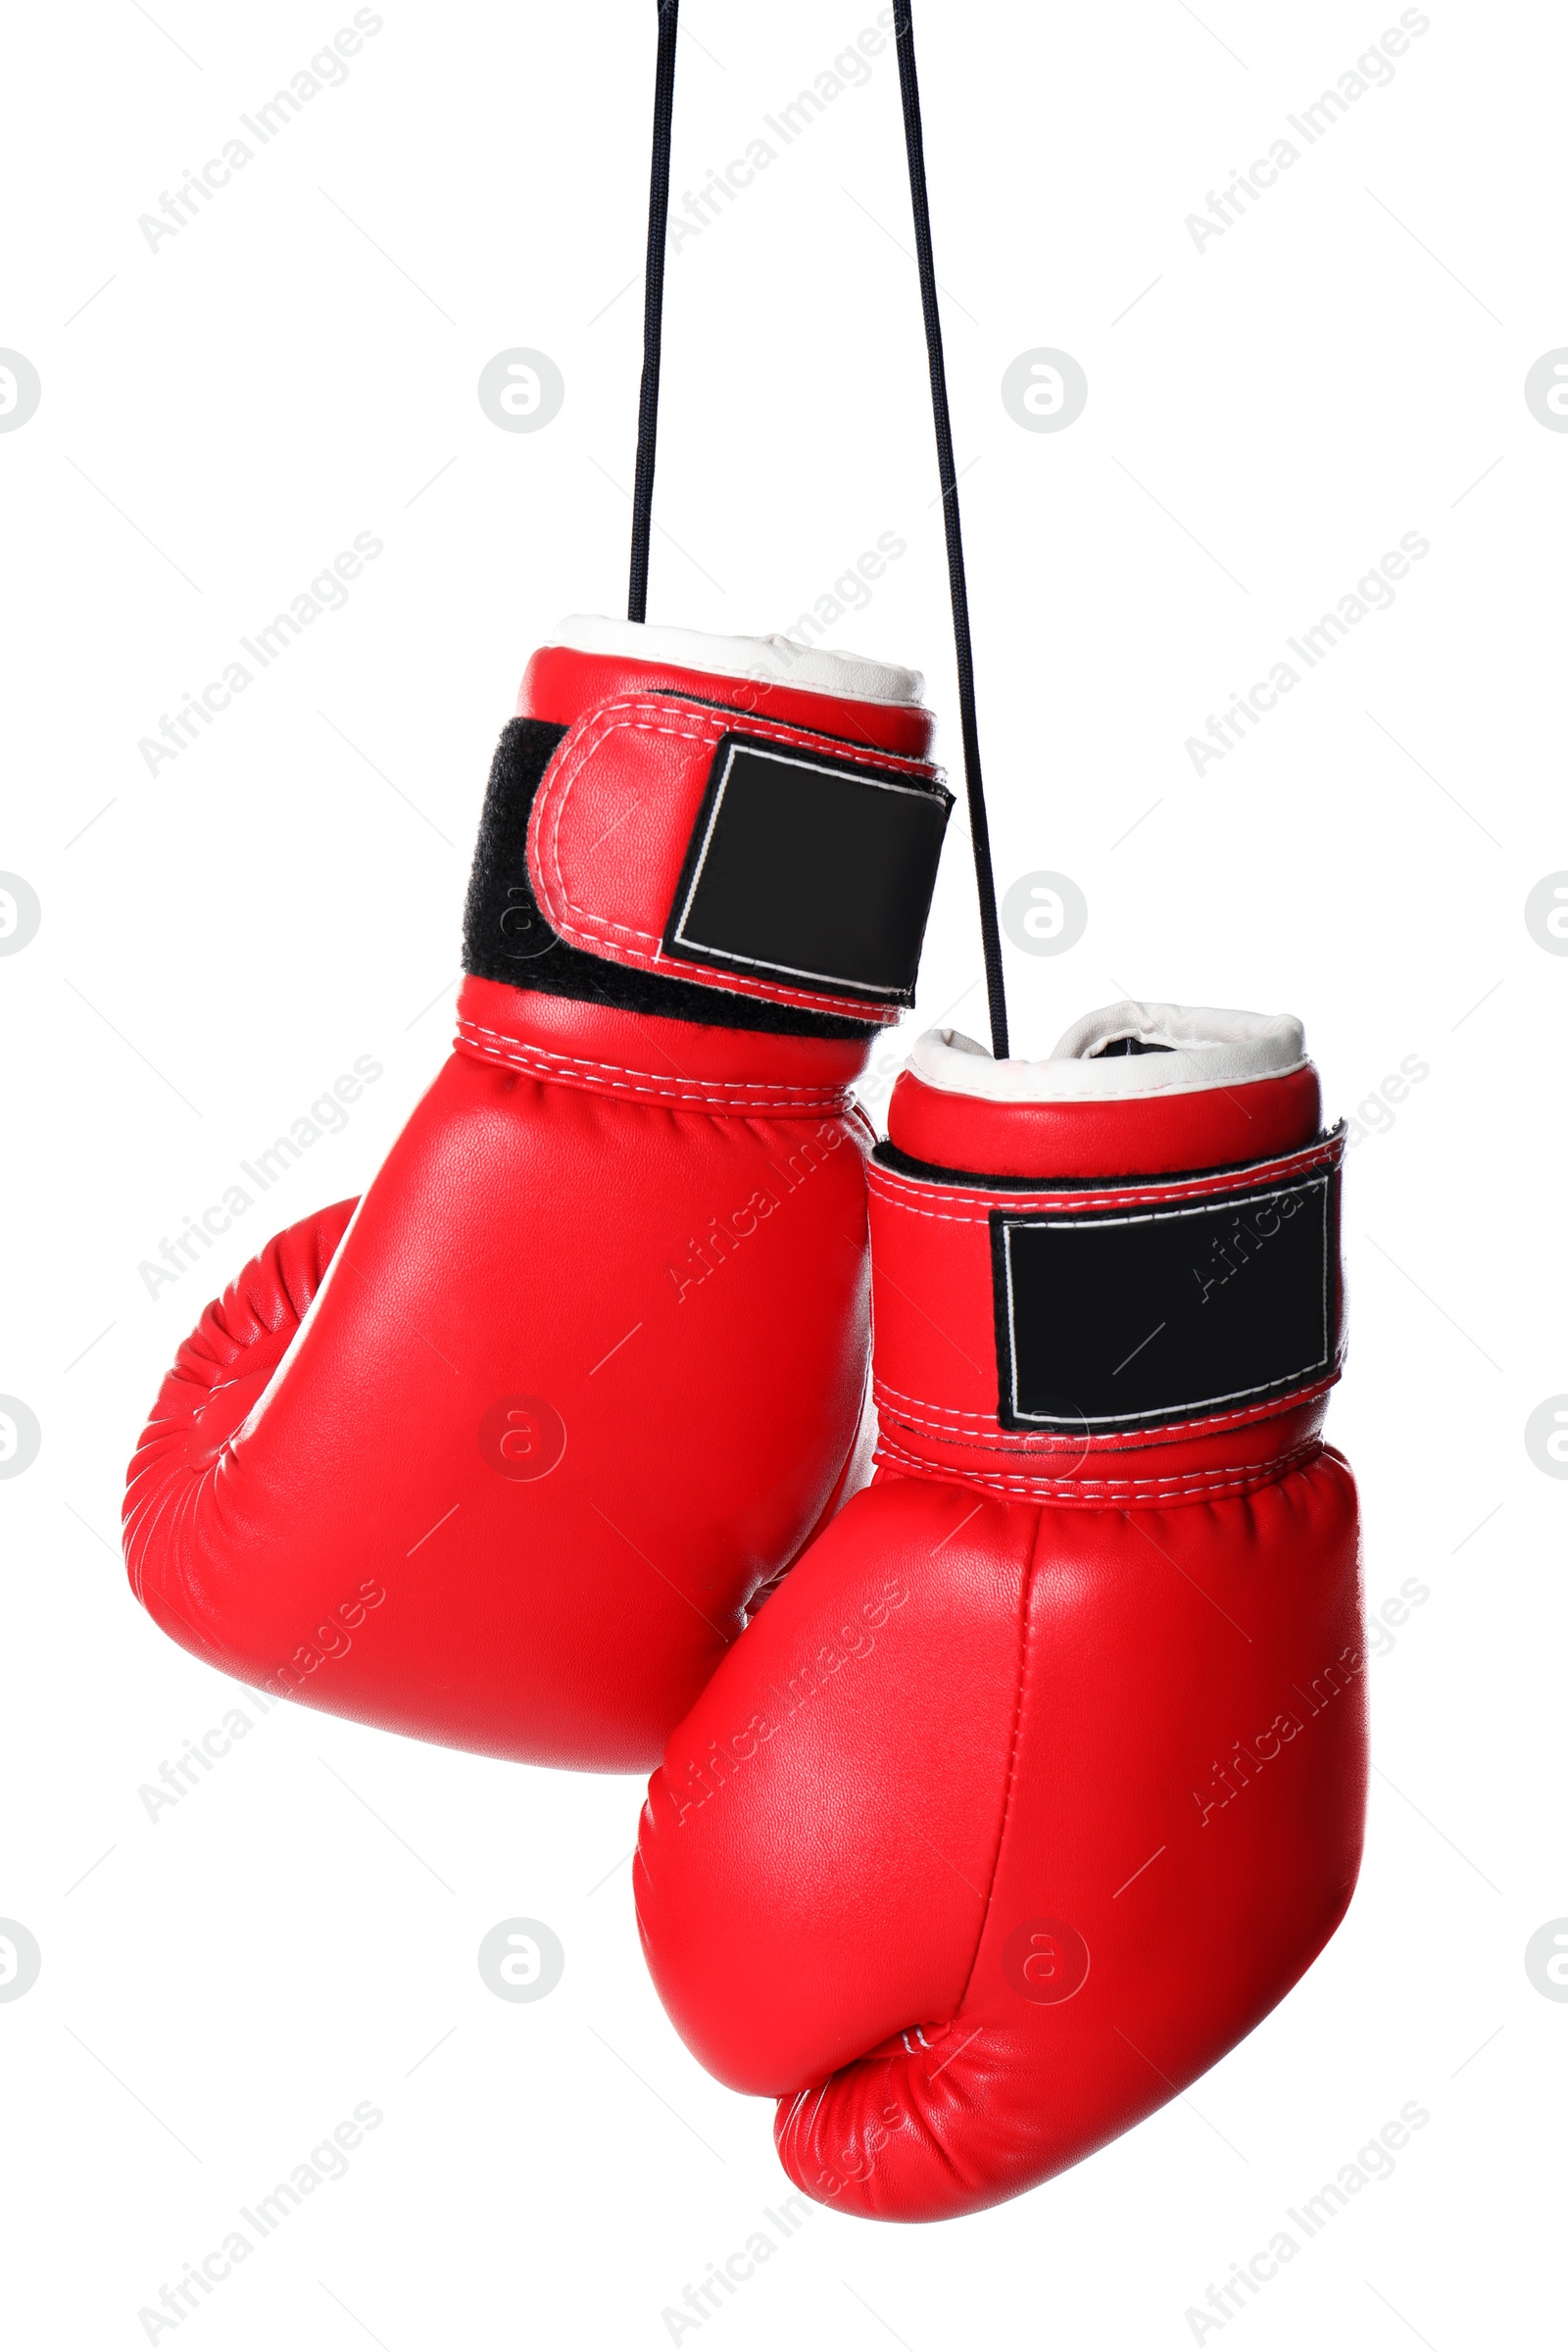 Photo of Pair of boxing gloves on white background